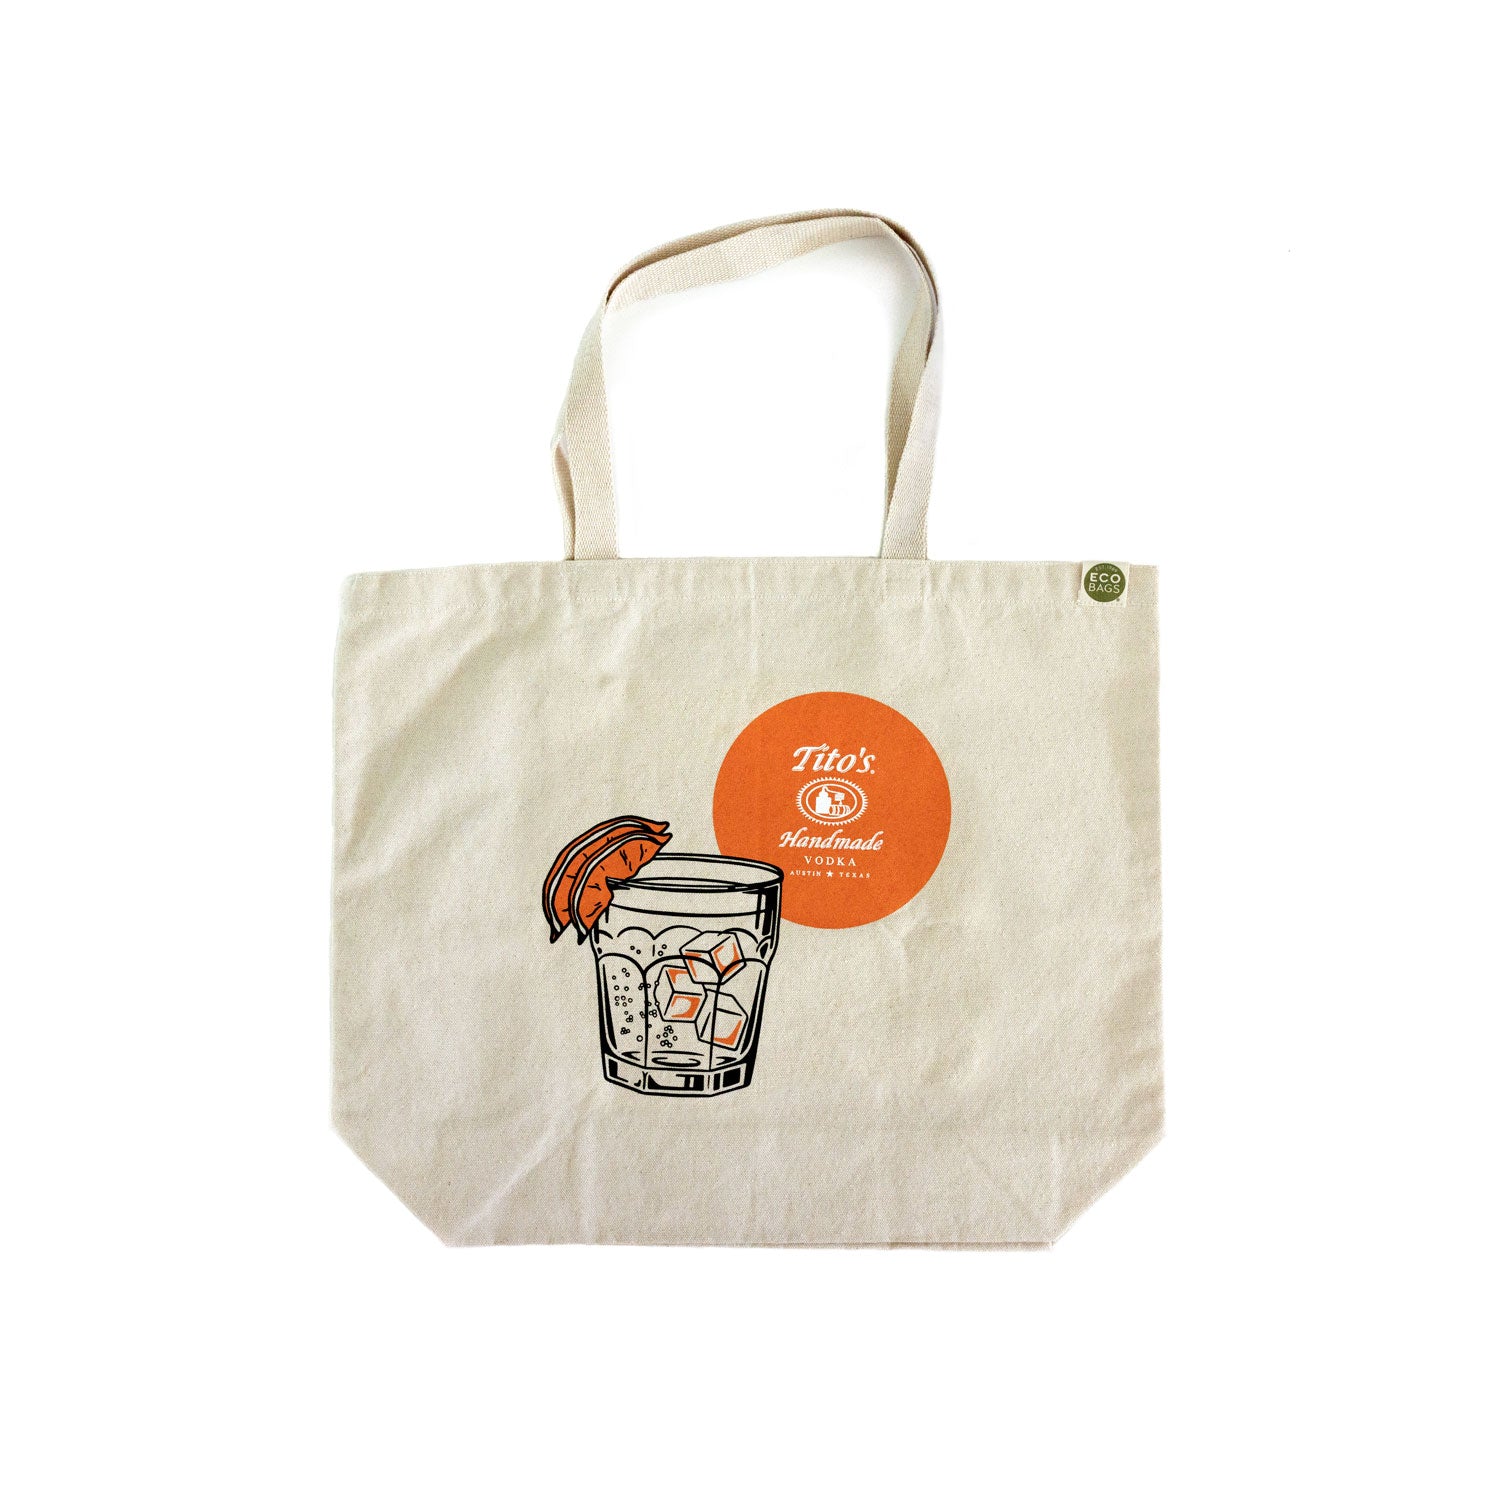 Tote bag with Tito's Handmade Vodka logo and illustration of a cocktail